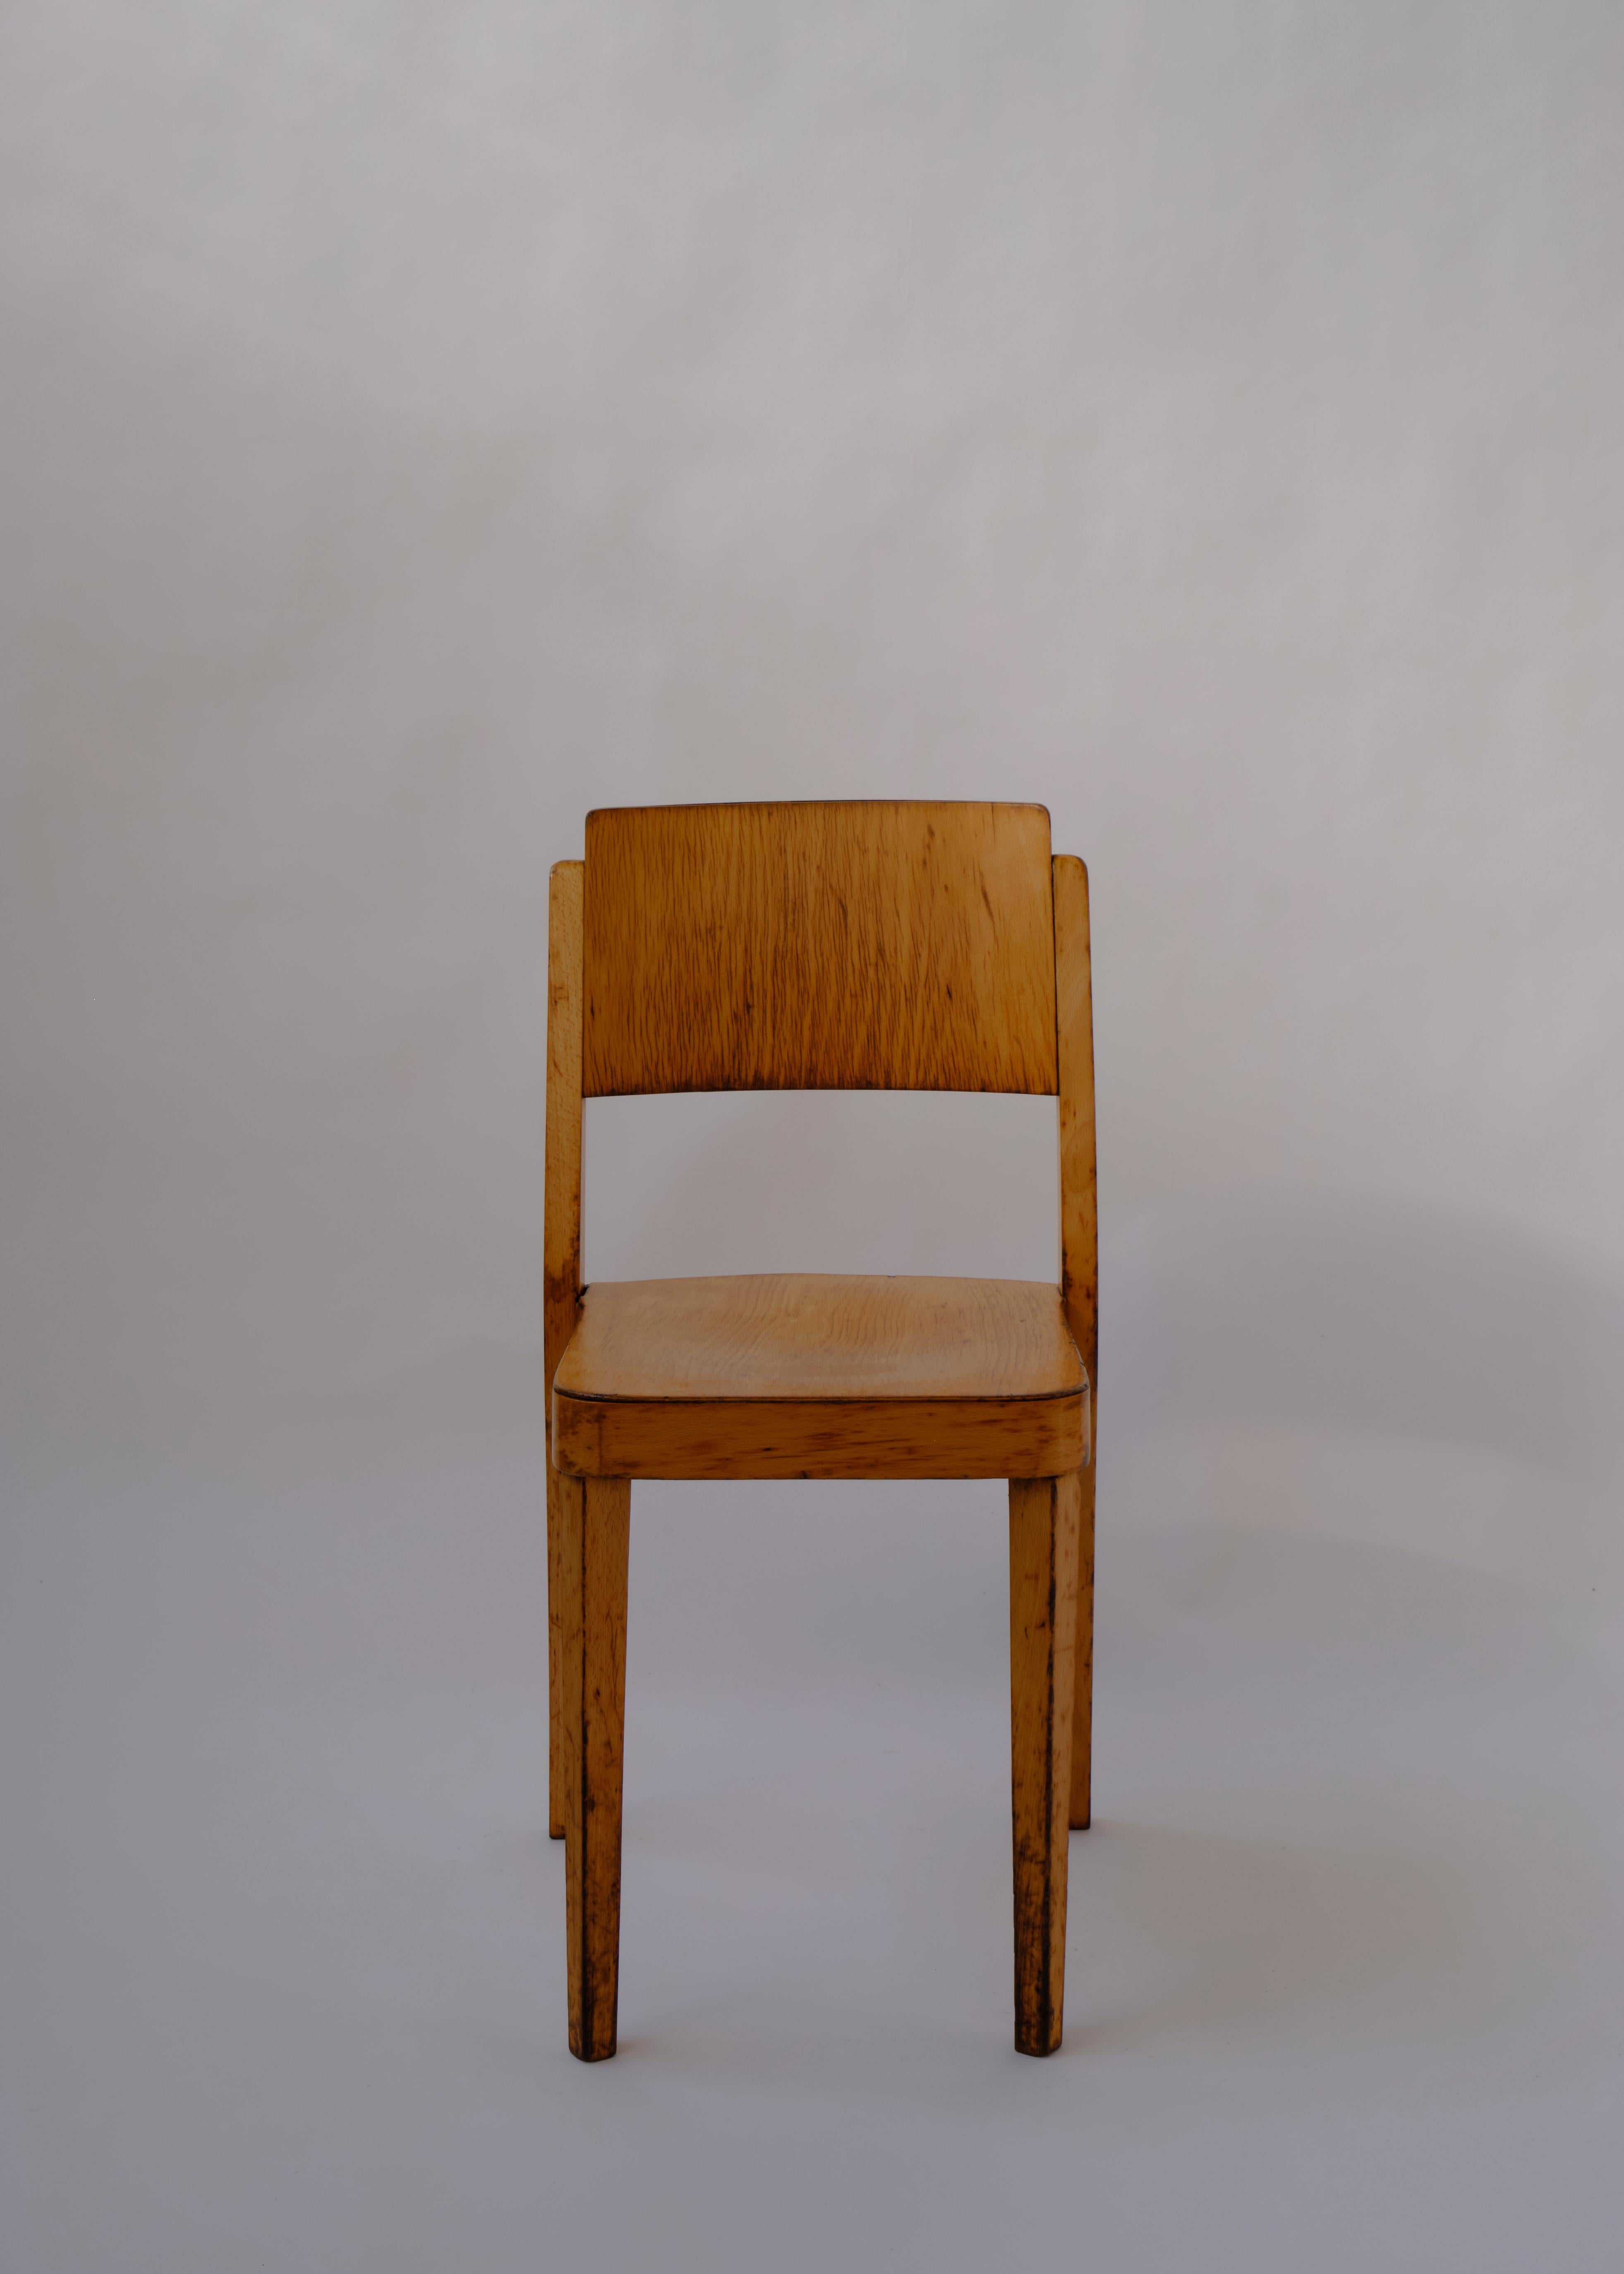 Pair of Stackable Model A 1250 Montana Chairs, by Thonet, 1930 In Good Condition For Sale In Edinburgh, Scotland